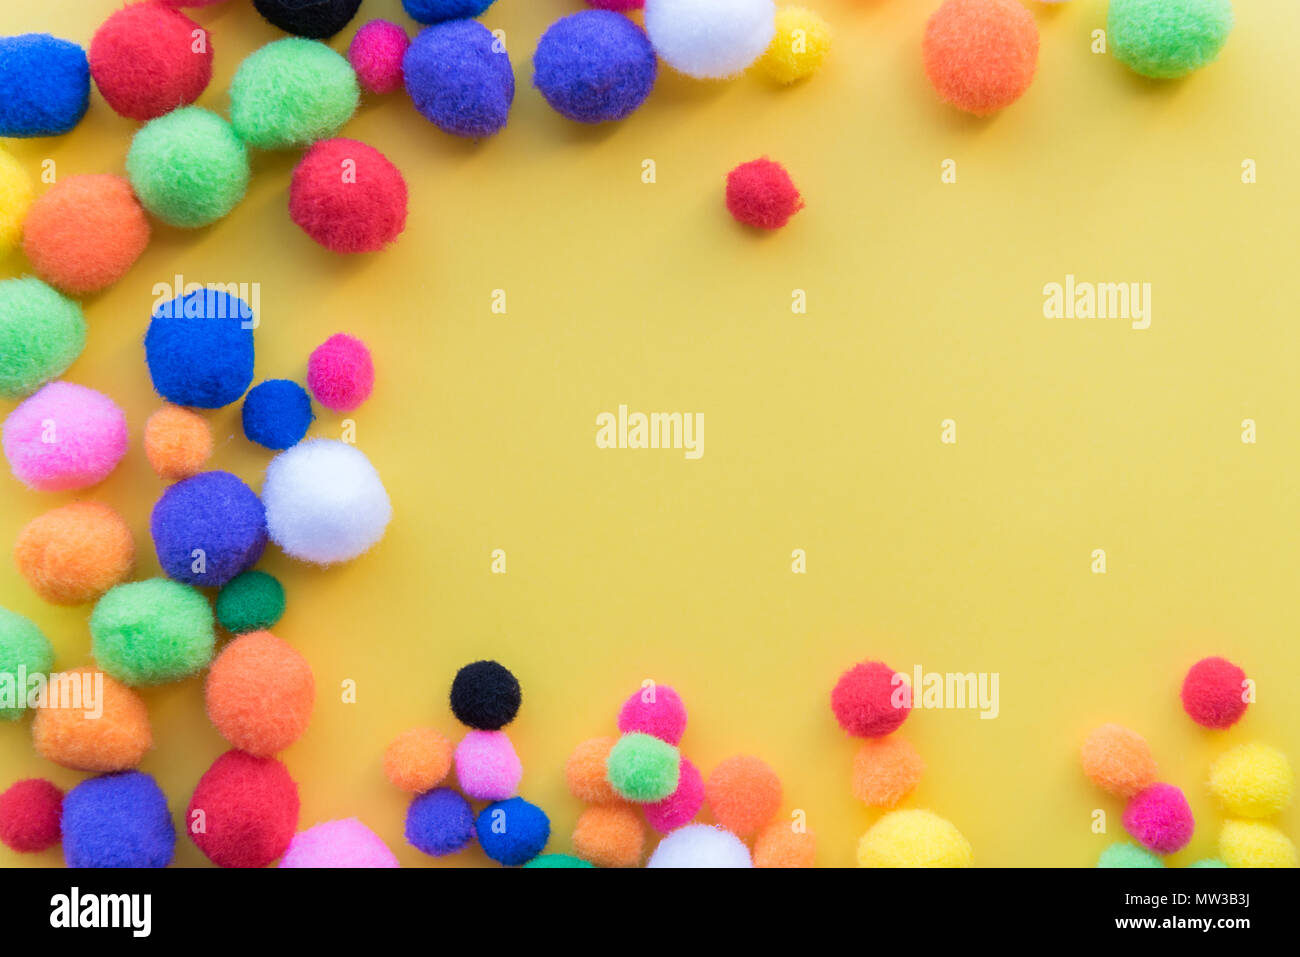 Pom Poms High Resolution Stock Photography and Images - Alamy